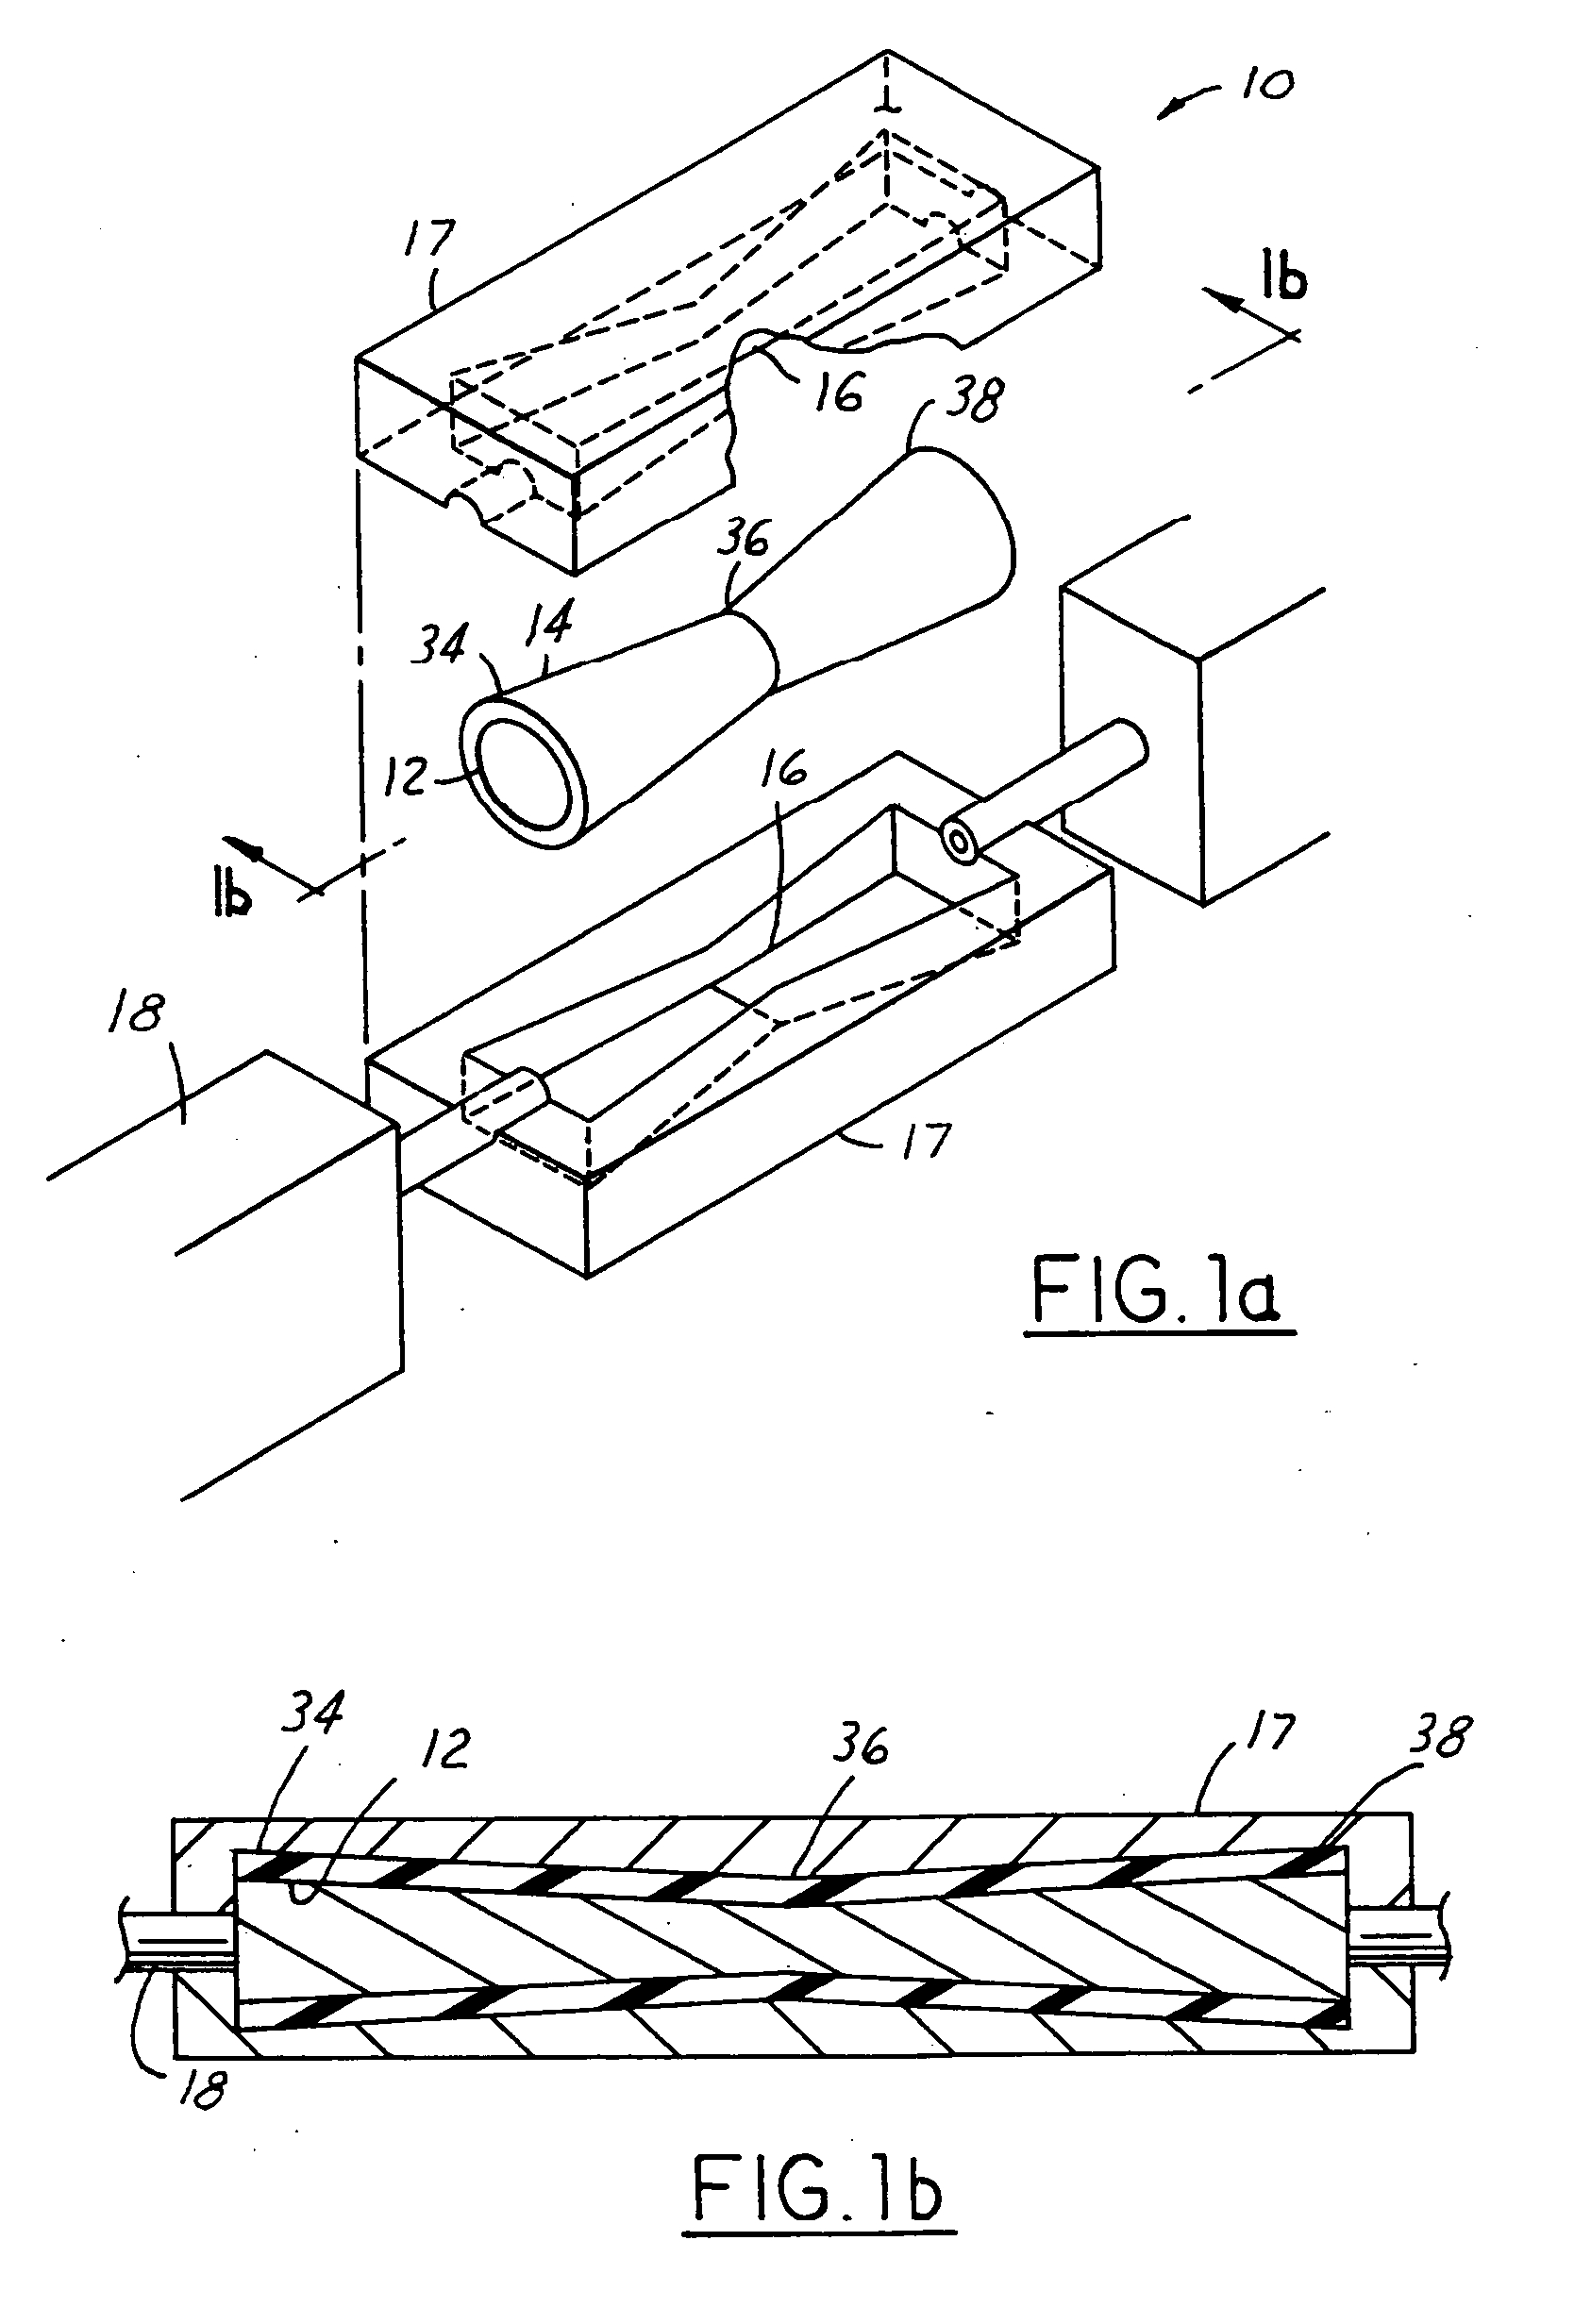 Component specific tube banks for hydroforming body structure components